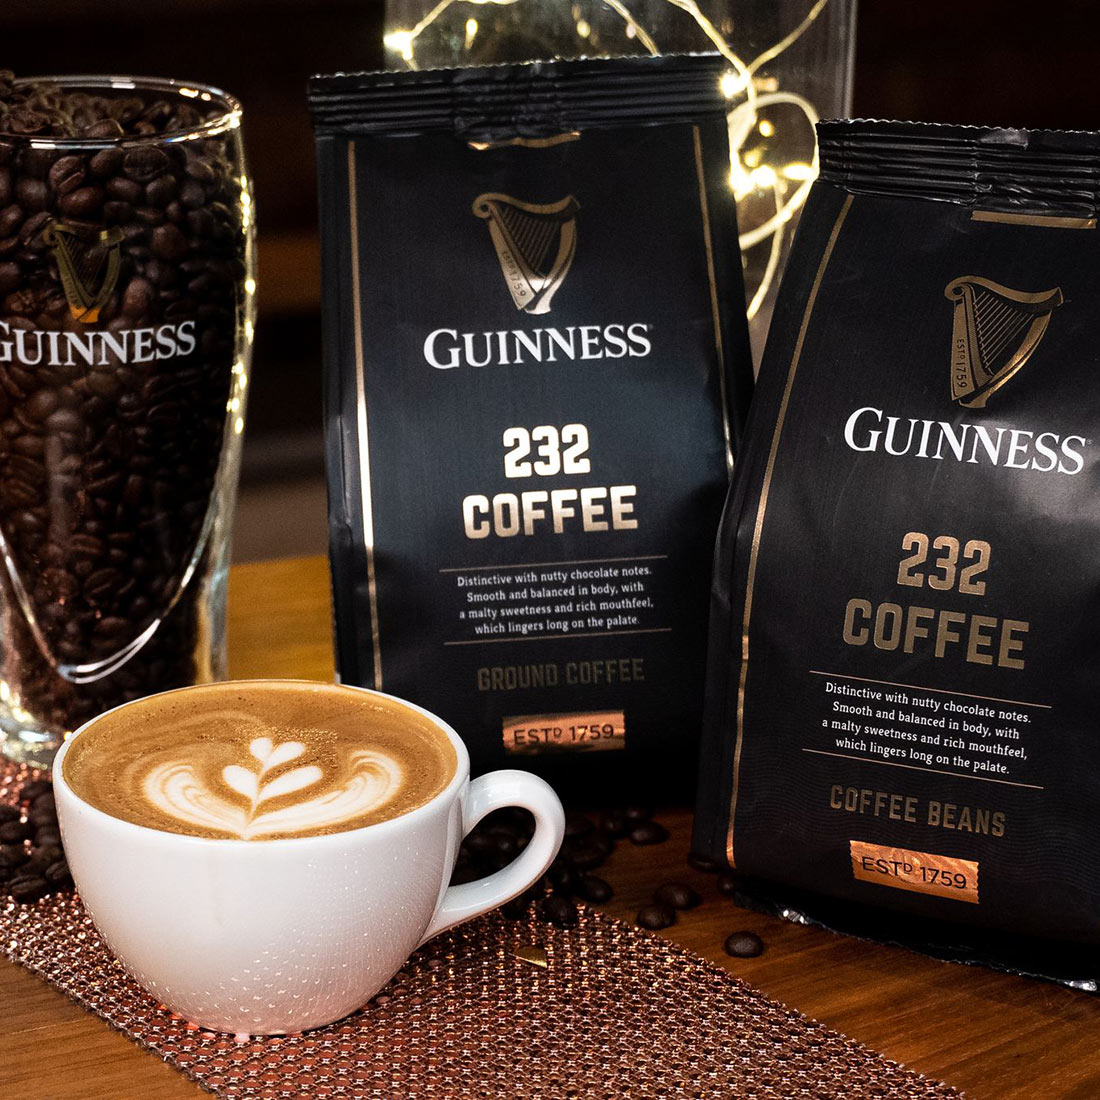 Limited-edition Guinness Ground Coffee 227g on a table.